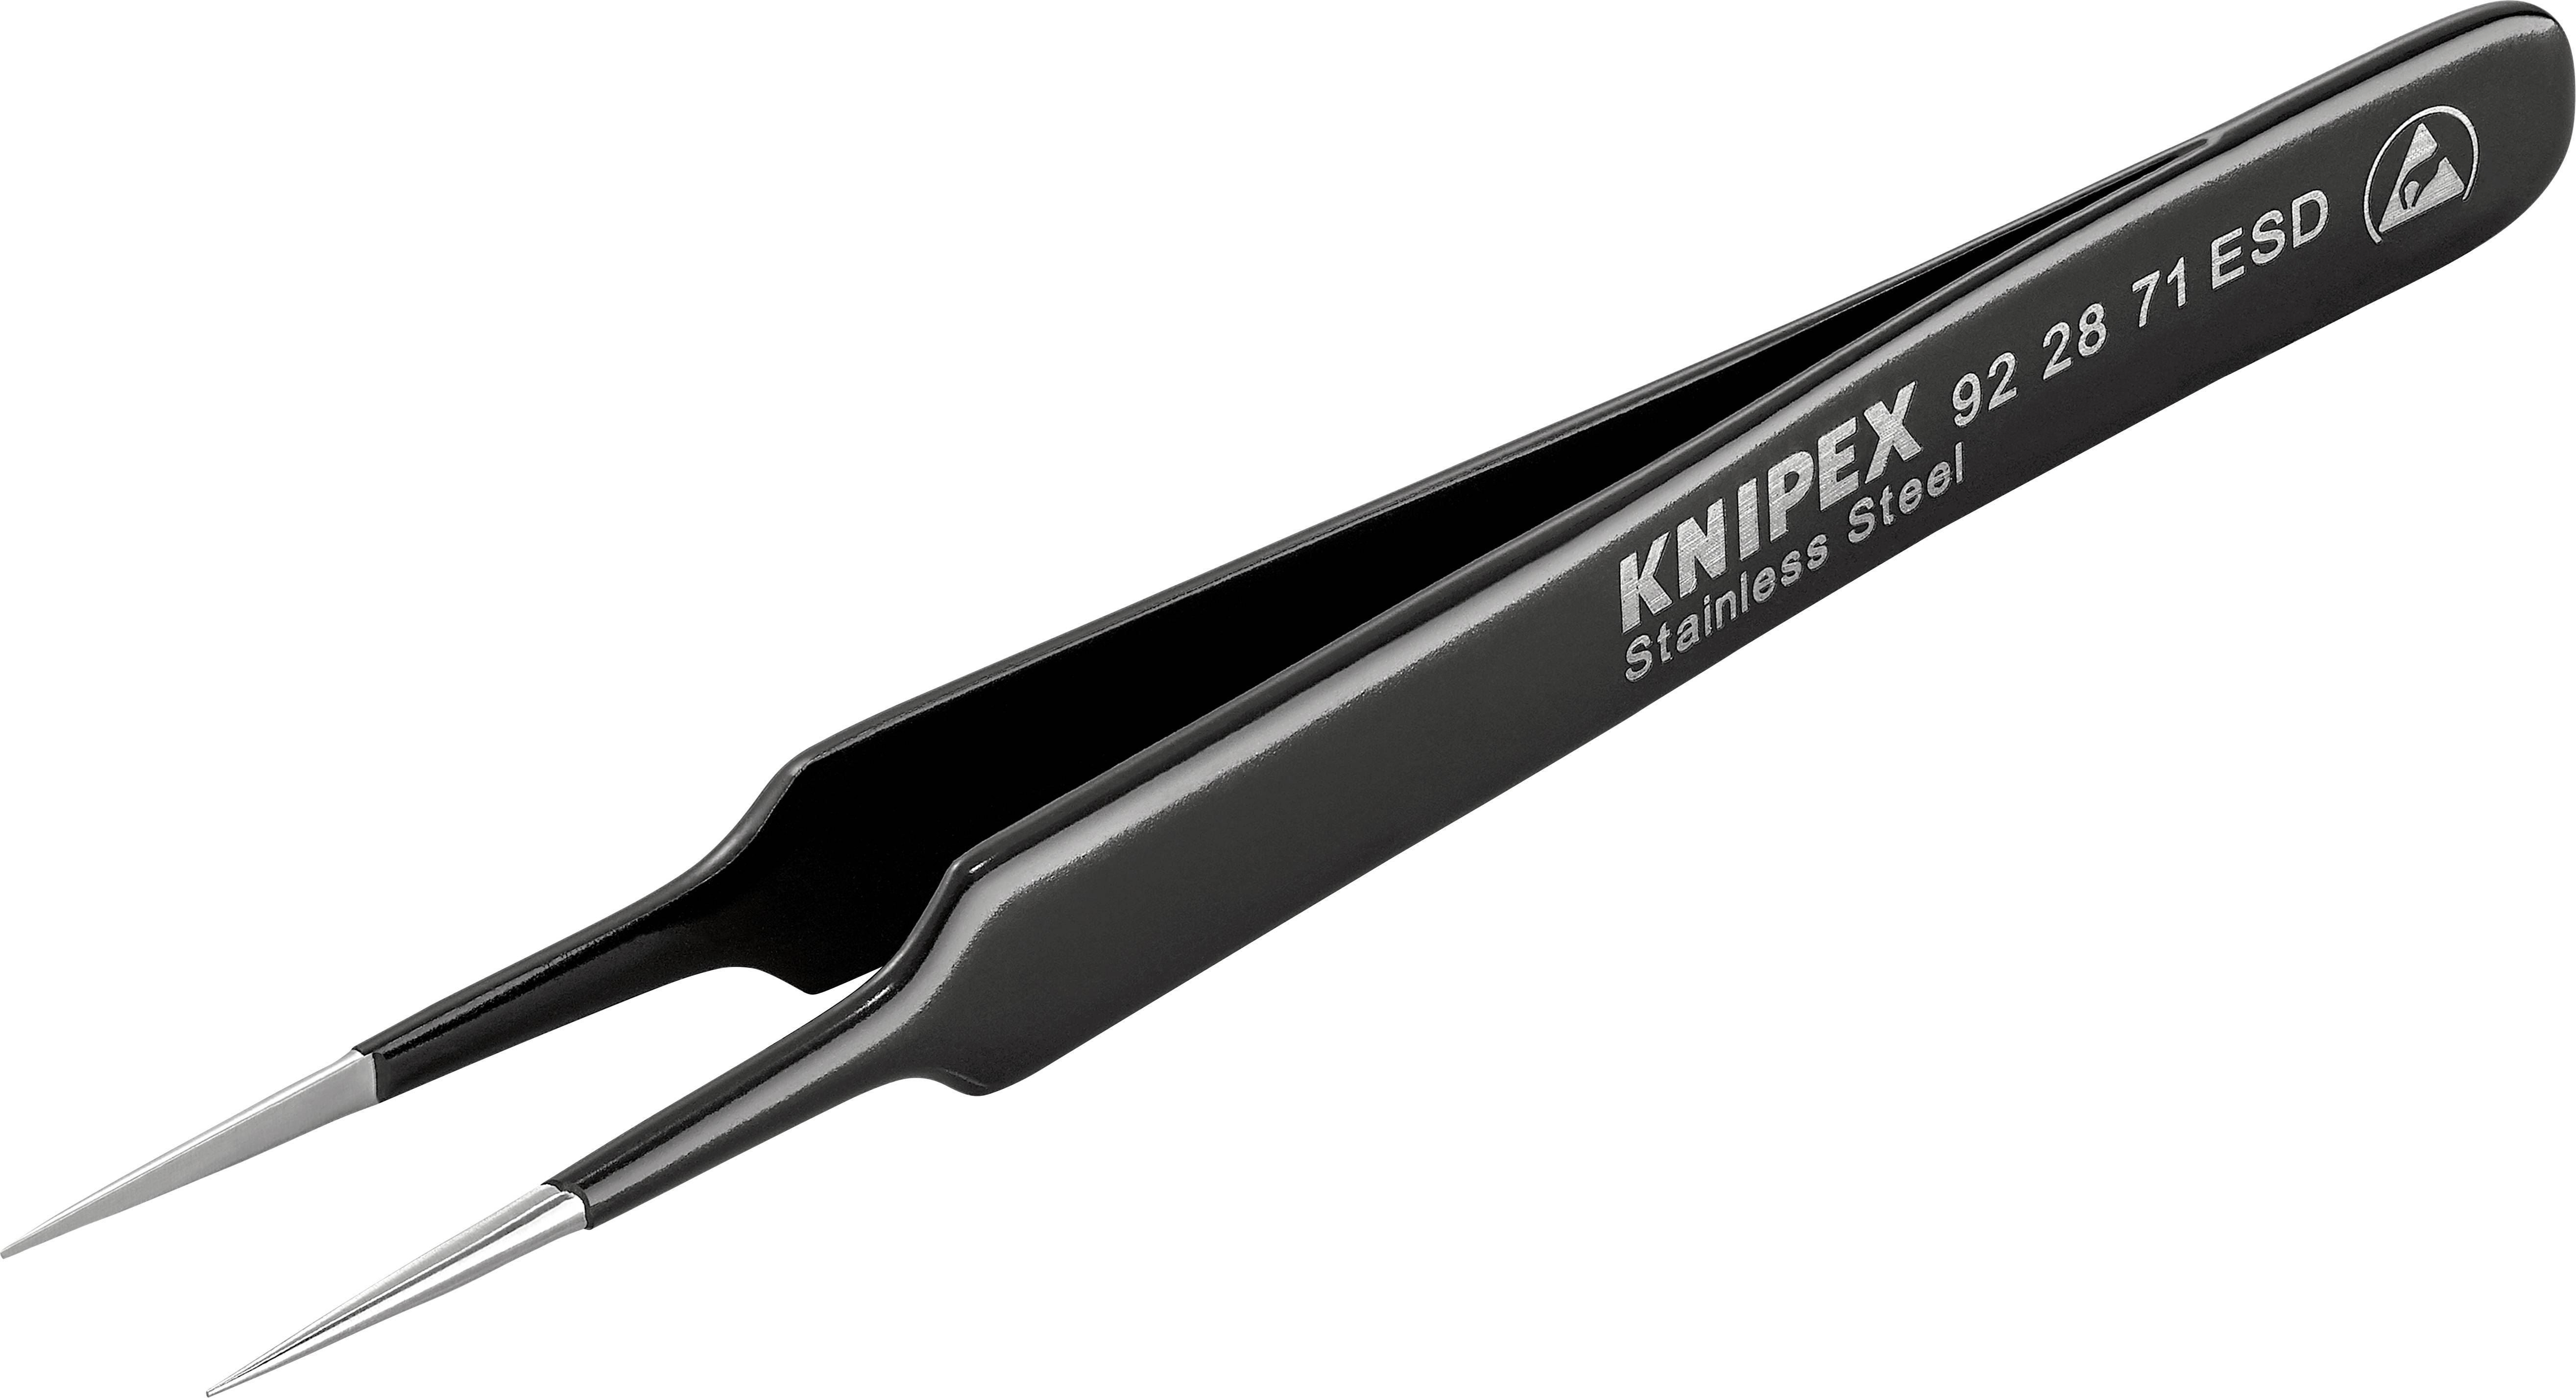 KNIPEX Präzisions-Pinzette 110 mm (92 28 71 ESD)